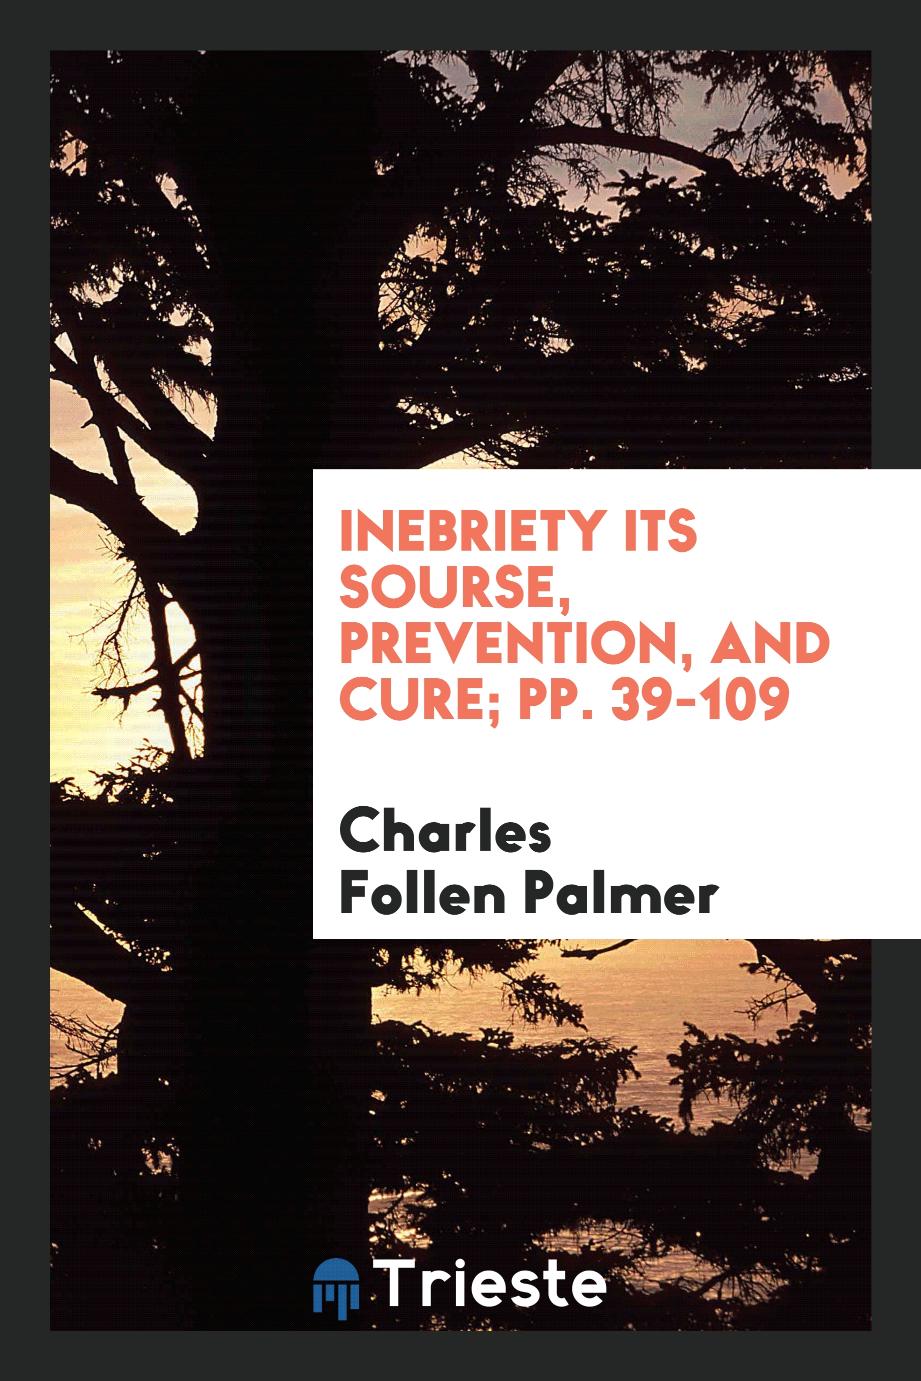 Inebriety its sourse, prevention, and cure; pp. 39-109